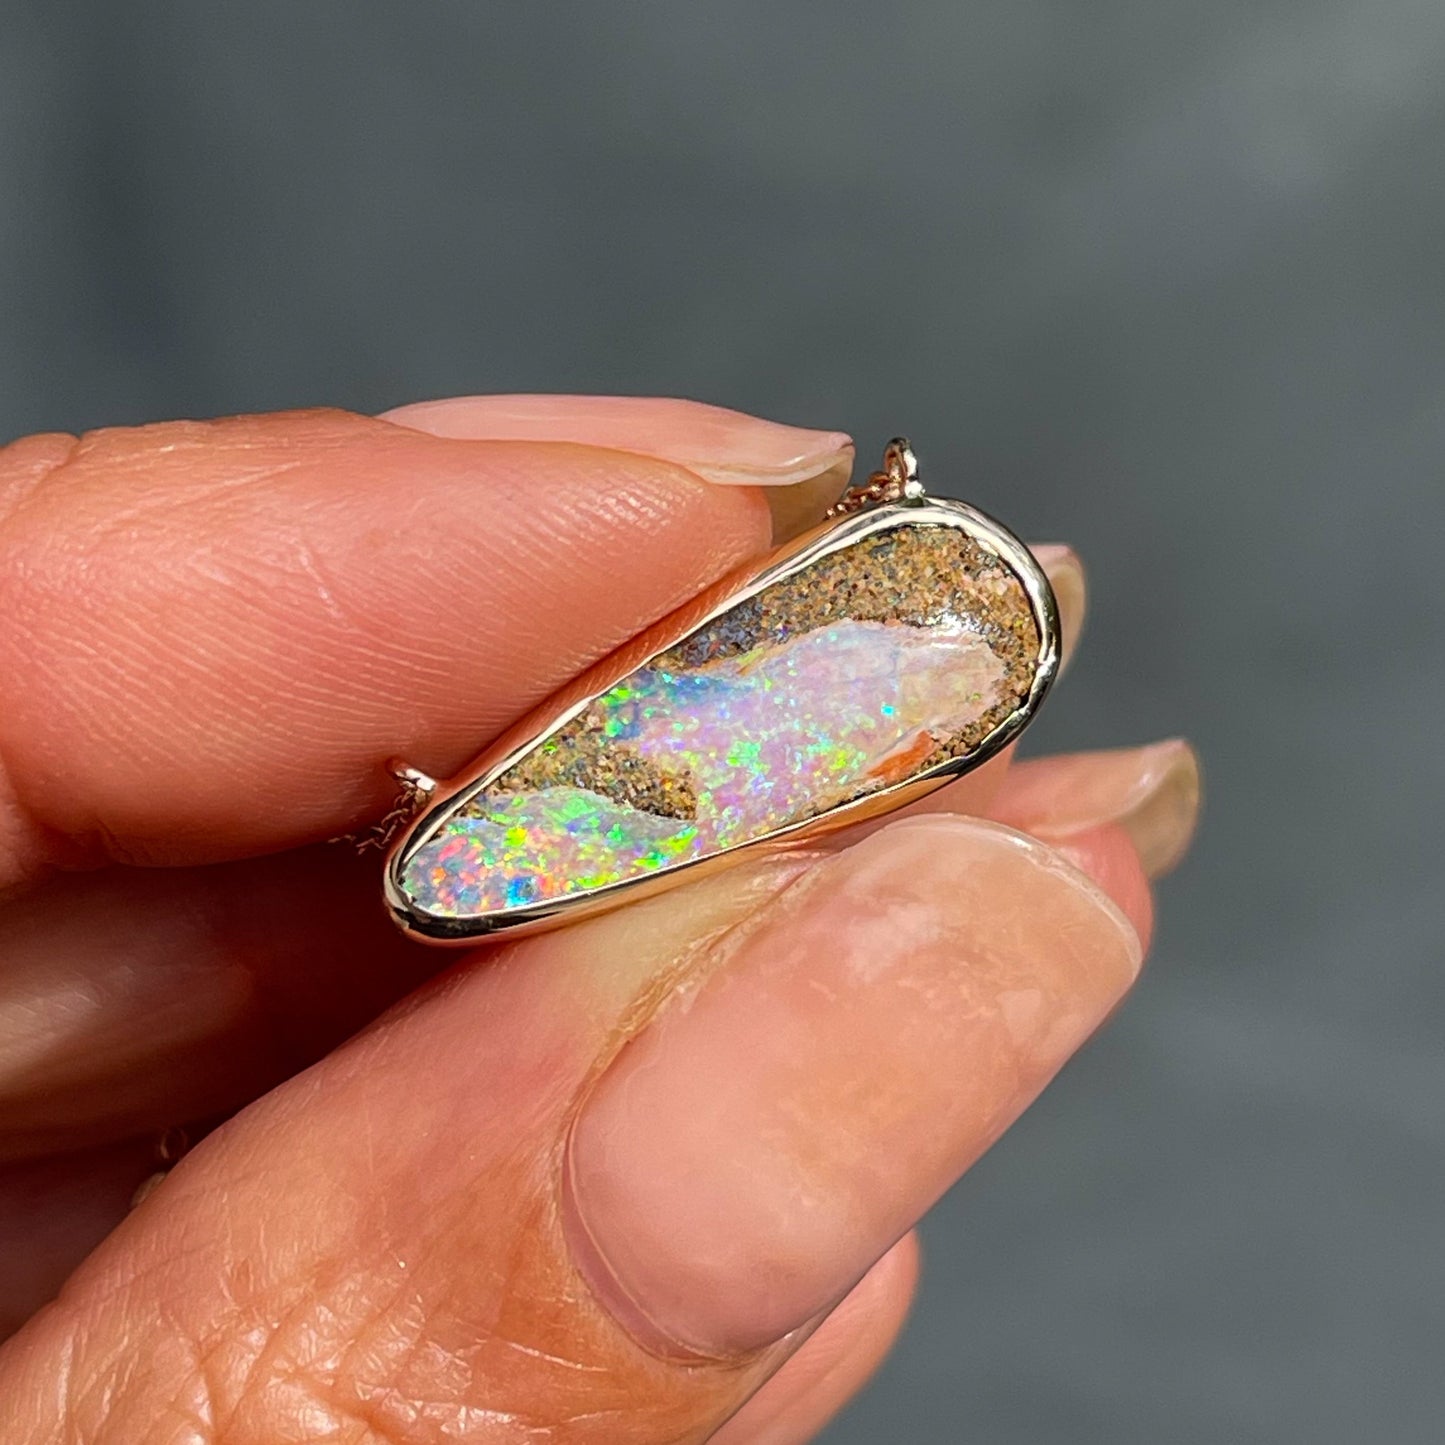 An Australian Opal Necklace by NIXIN Jewelry held in the sunlight. The opal stone flashes pink, purple, green and blue and is set in 14k rose gold.